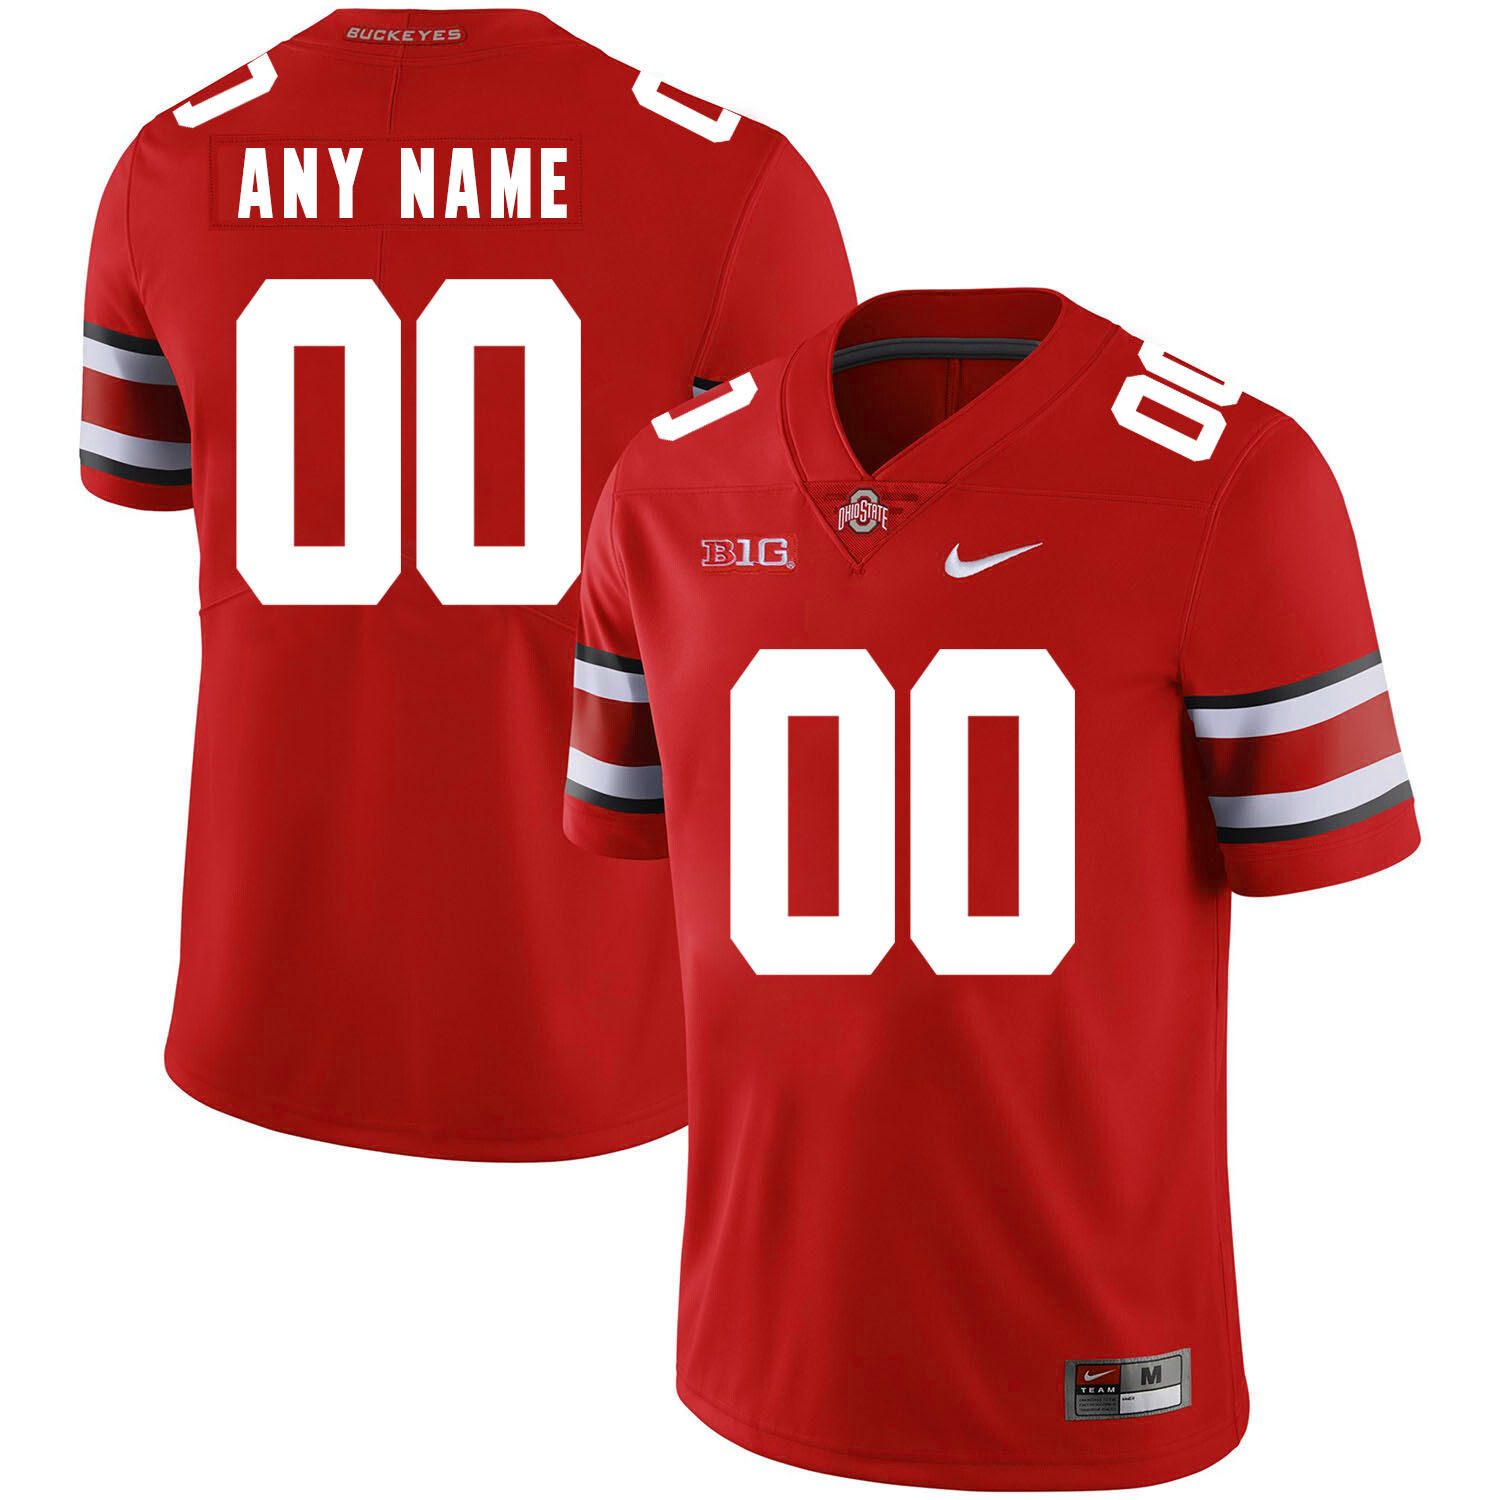 Ohio State Buckeyes Custom Name and Number Football Jersey Big Patch Red